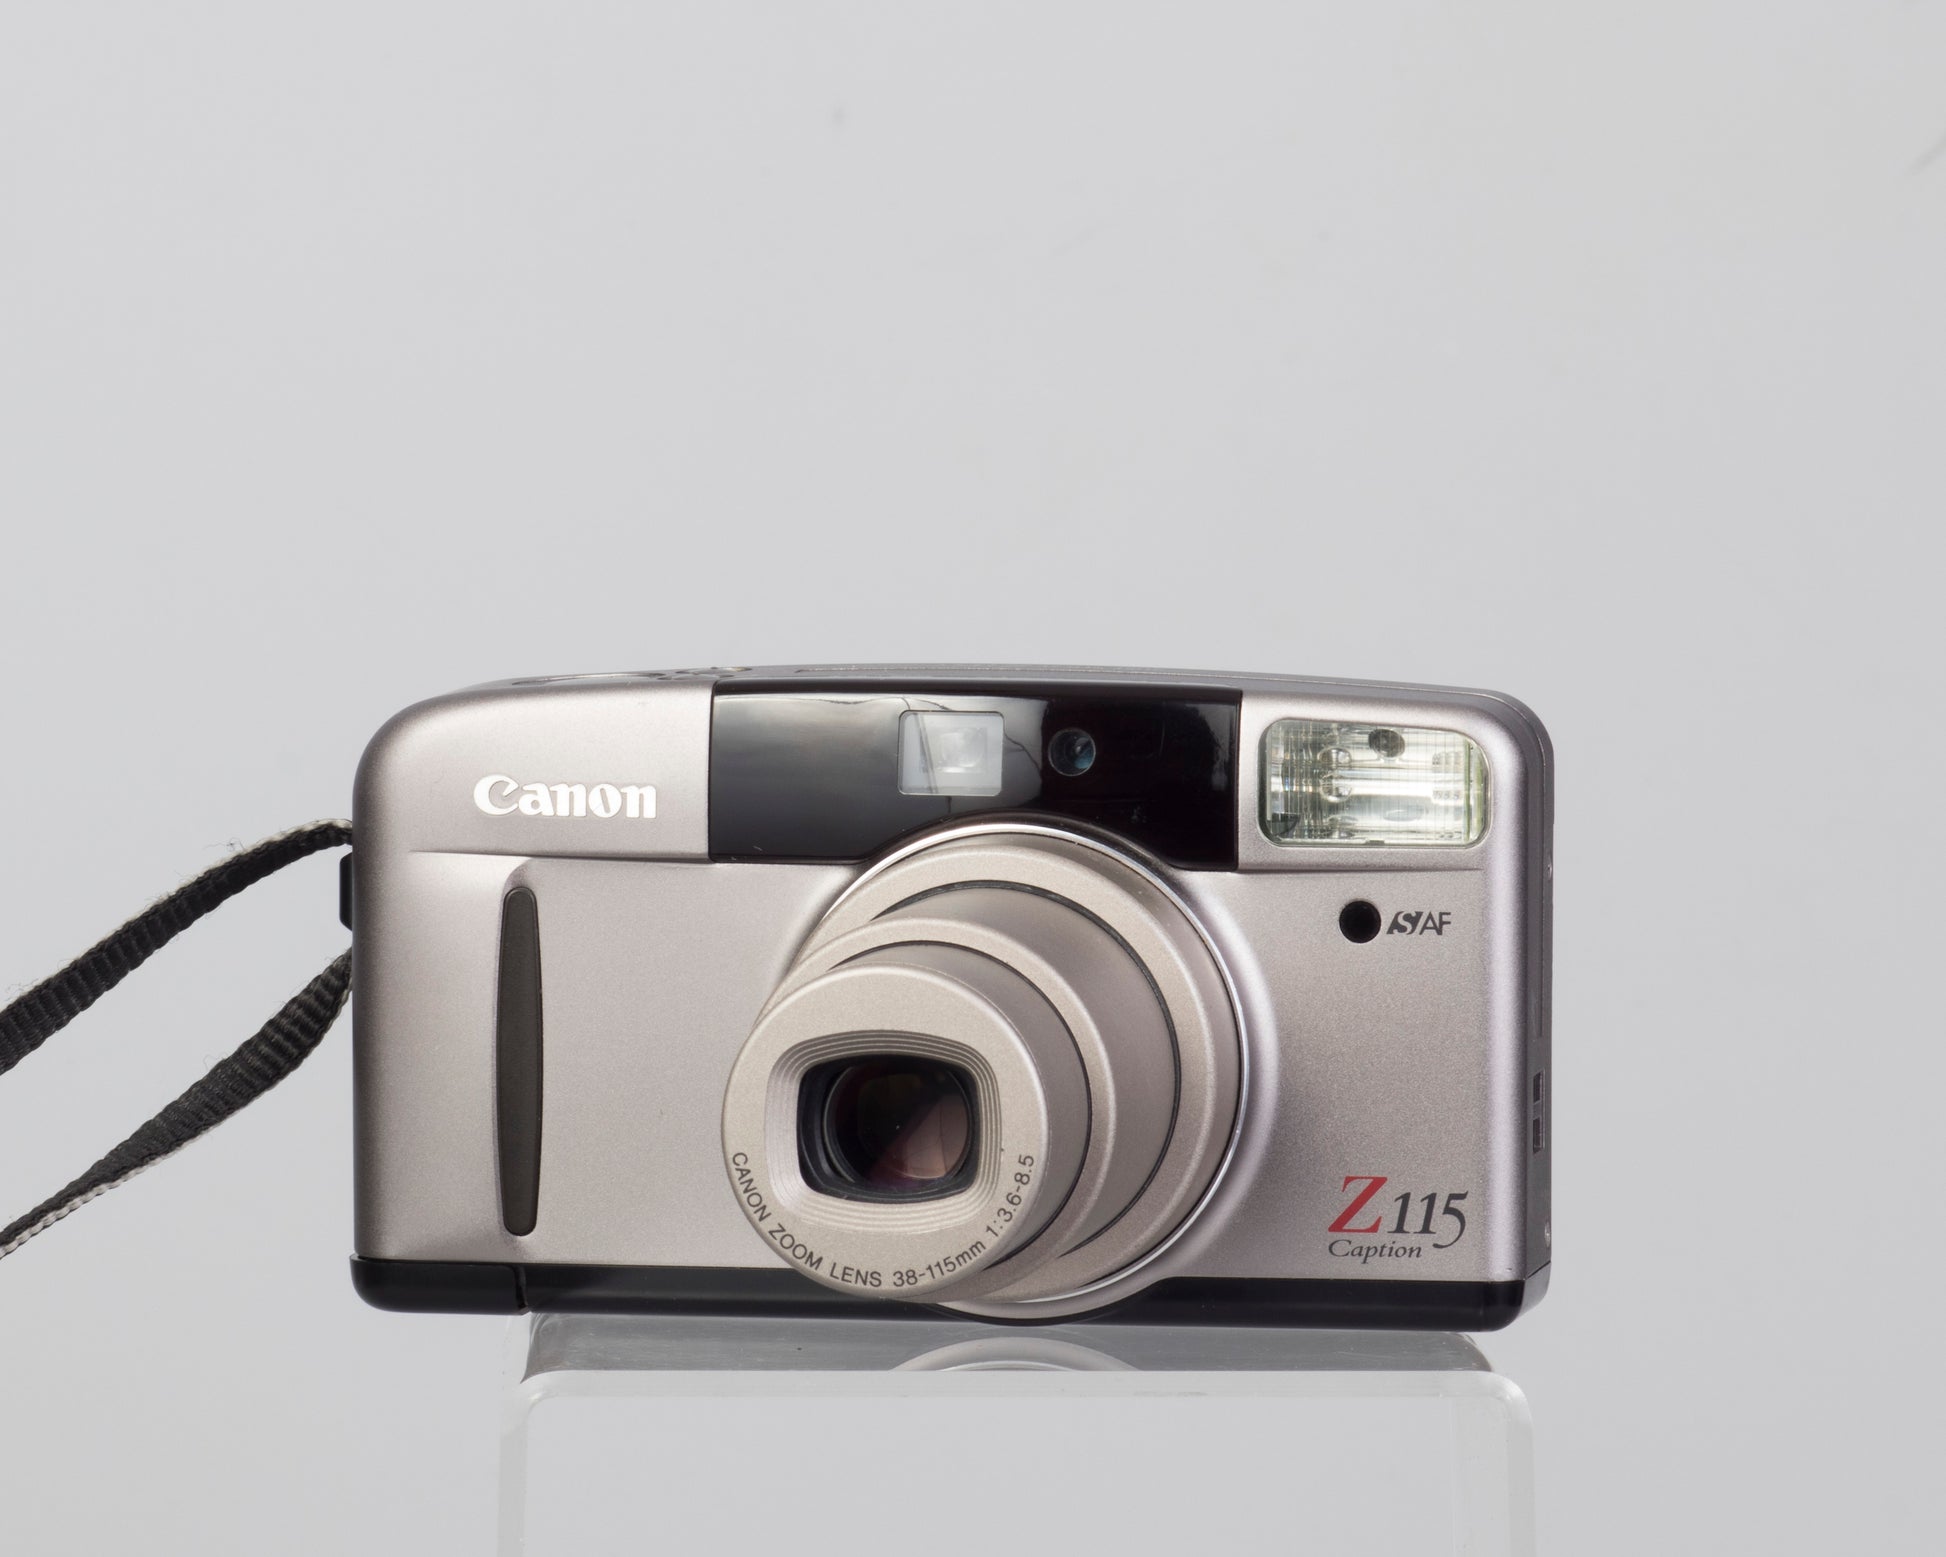 The Canon Sure Z115 was the company's top of the line 35mm point-and-shoot camera from the 1990s